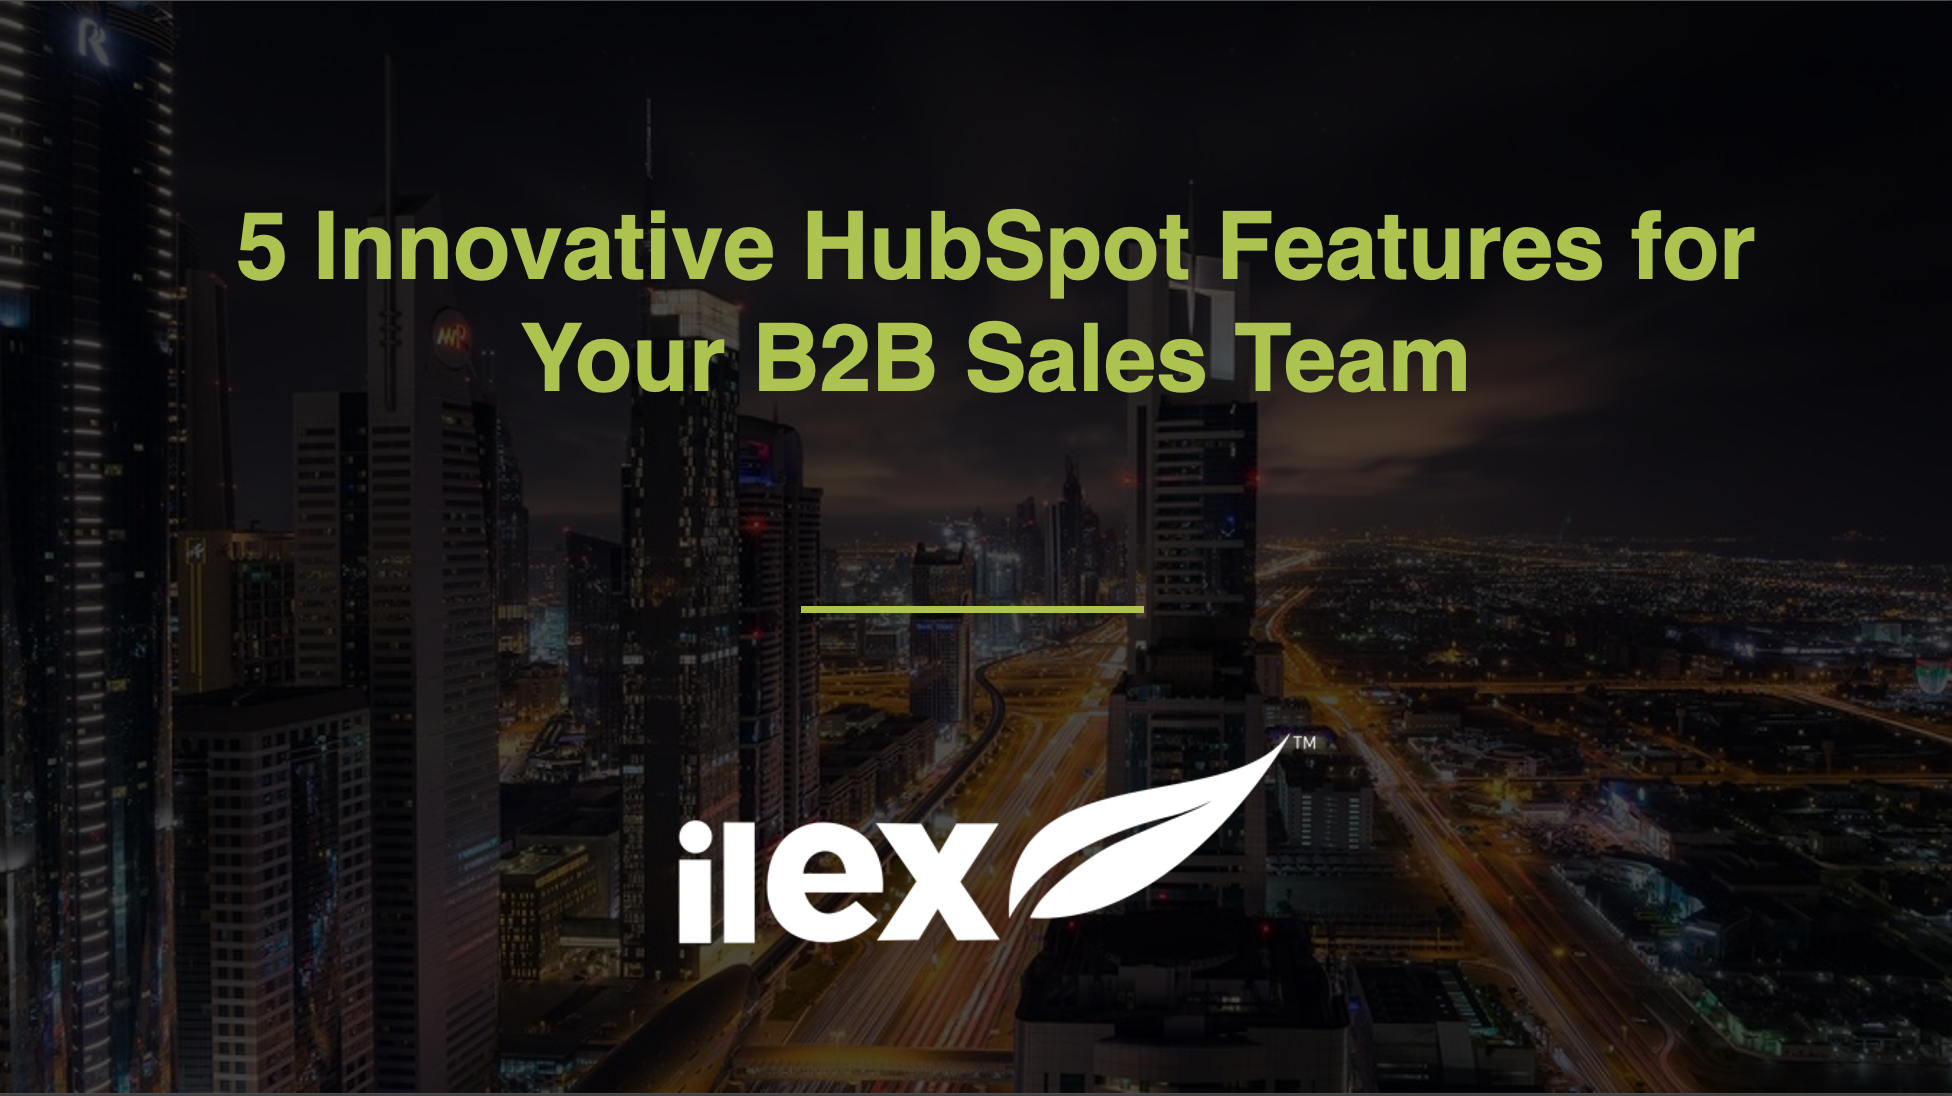 5 Innovative HubSpot Features for Your B2B Sales Team